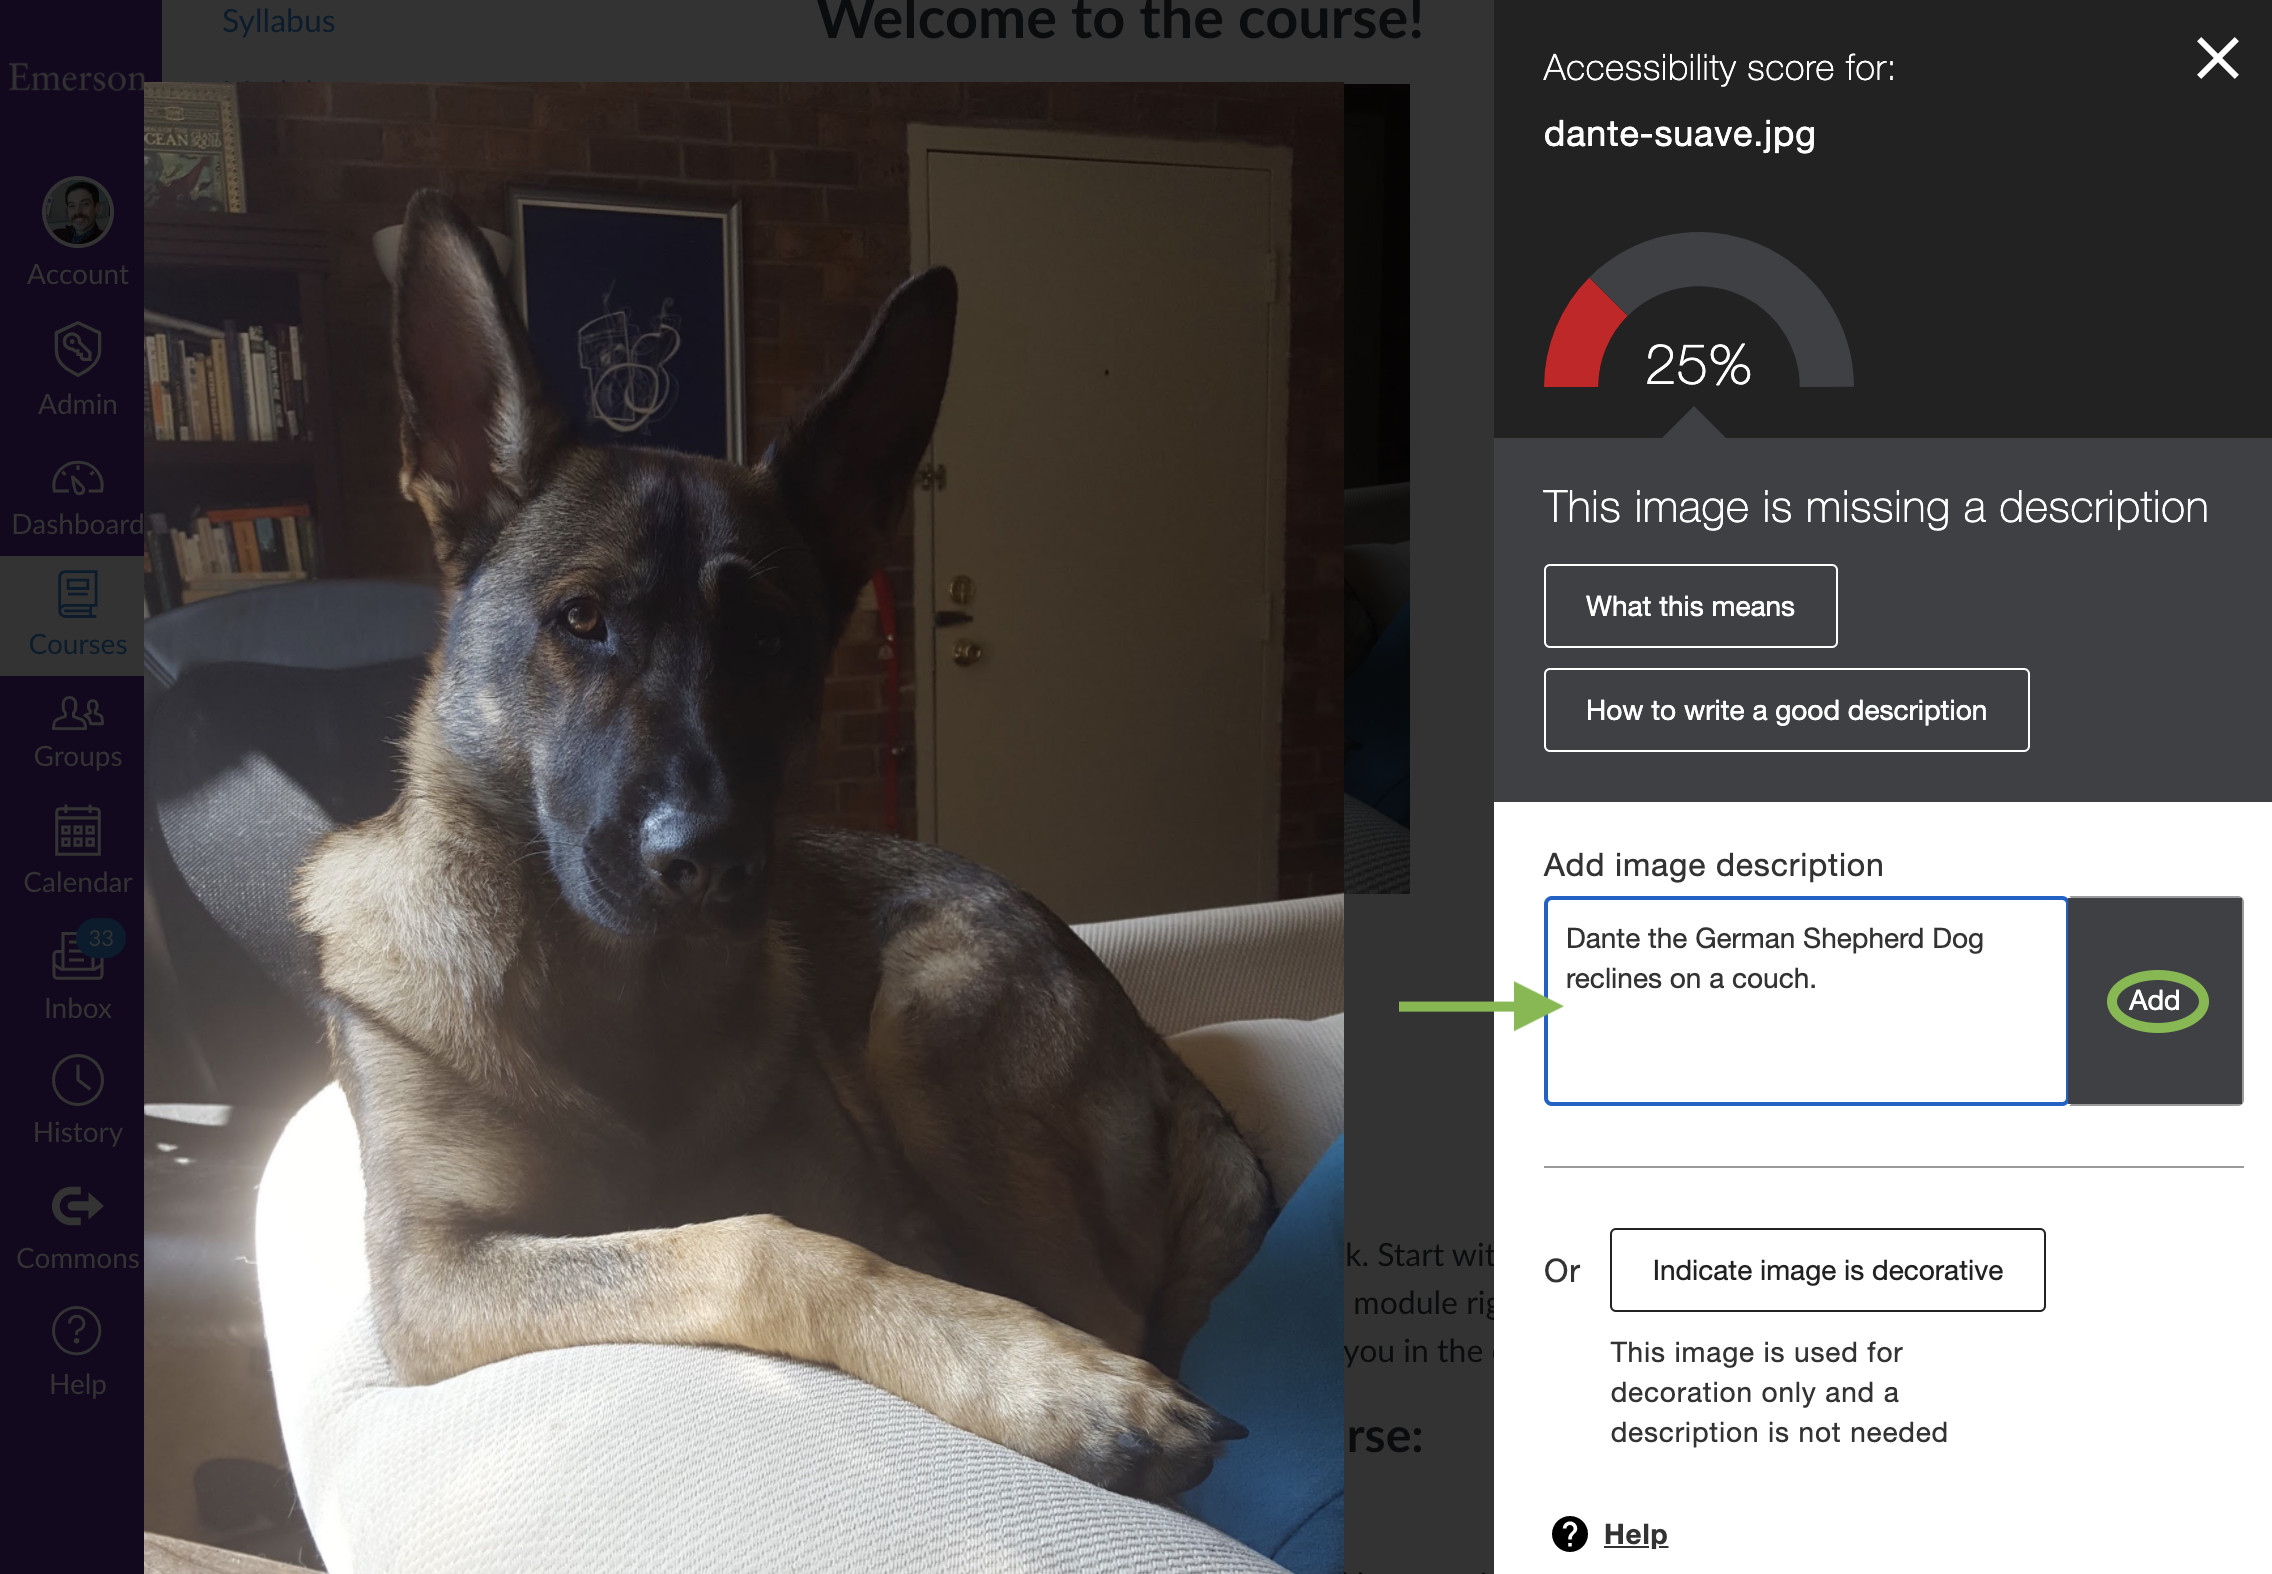 Ally's alt text entry interface. It consists of two panes: the left pane contains the image (here a dog on a couch); the right pane contains a text box and other options.